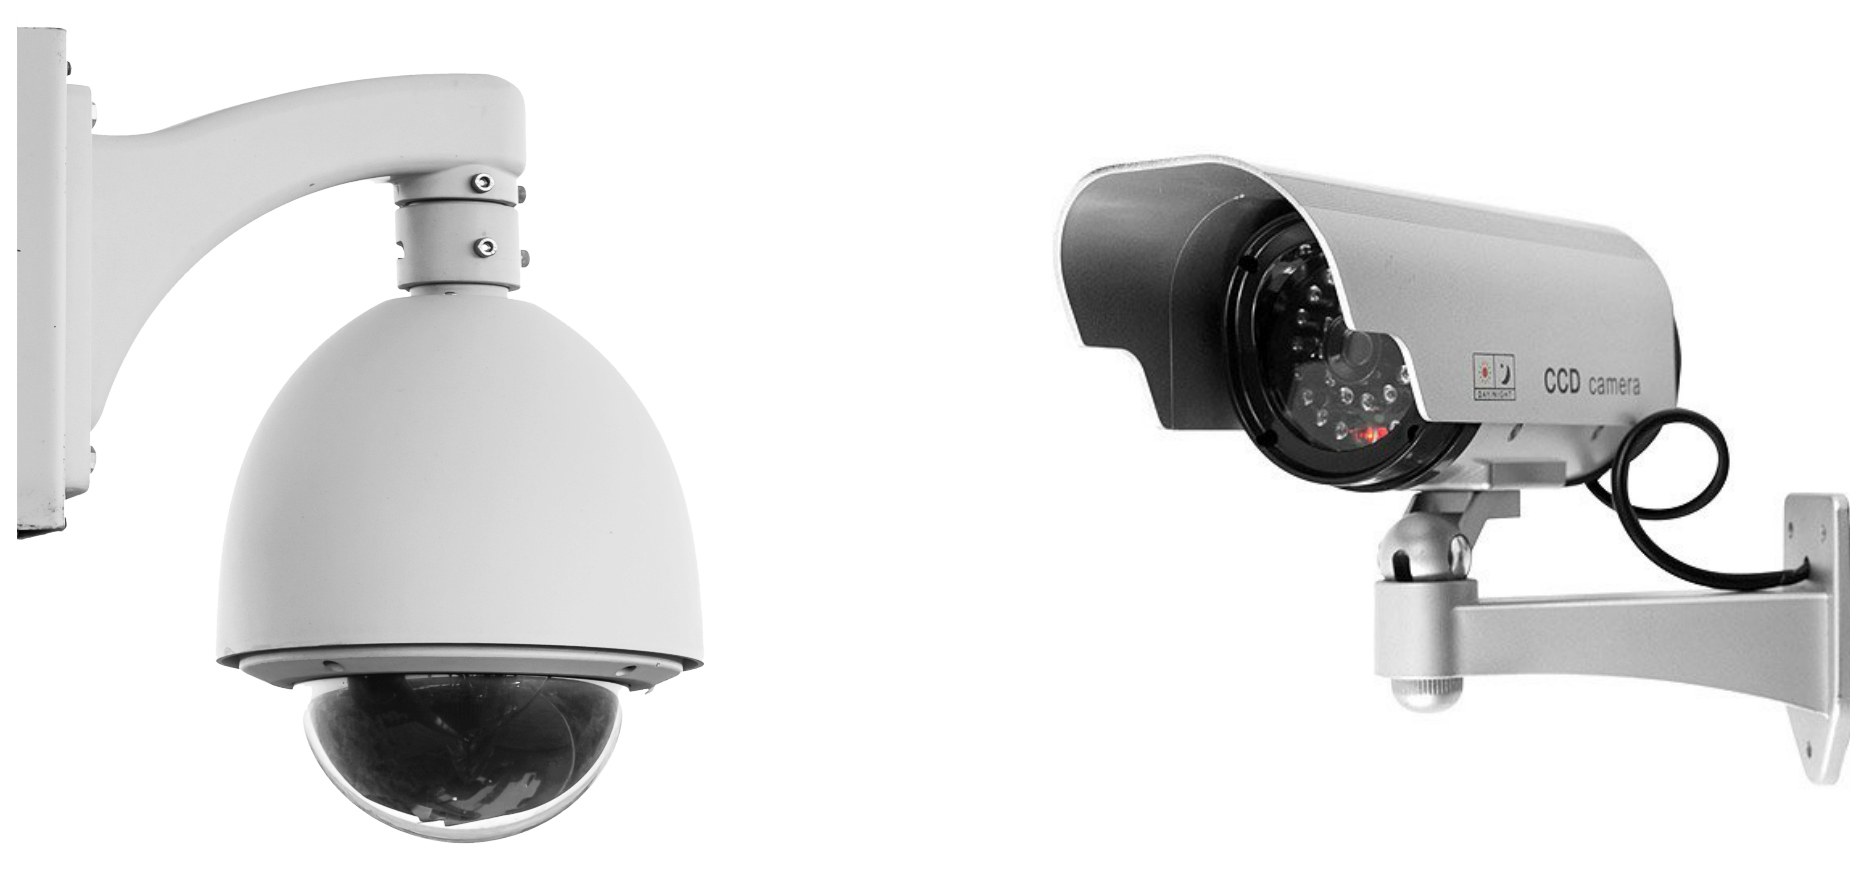 What Is A Security Camera?